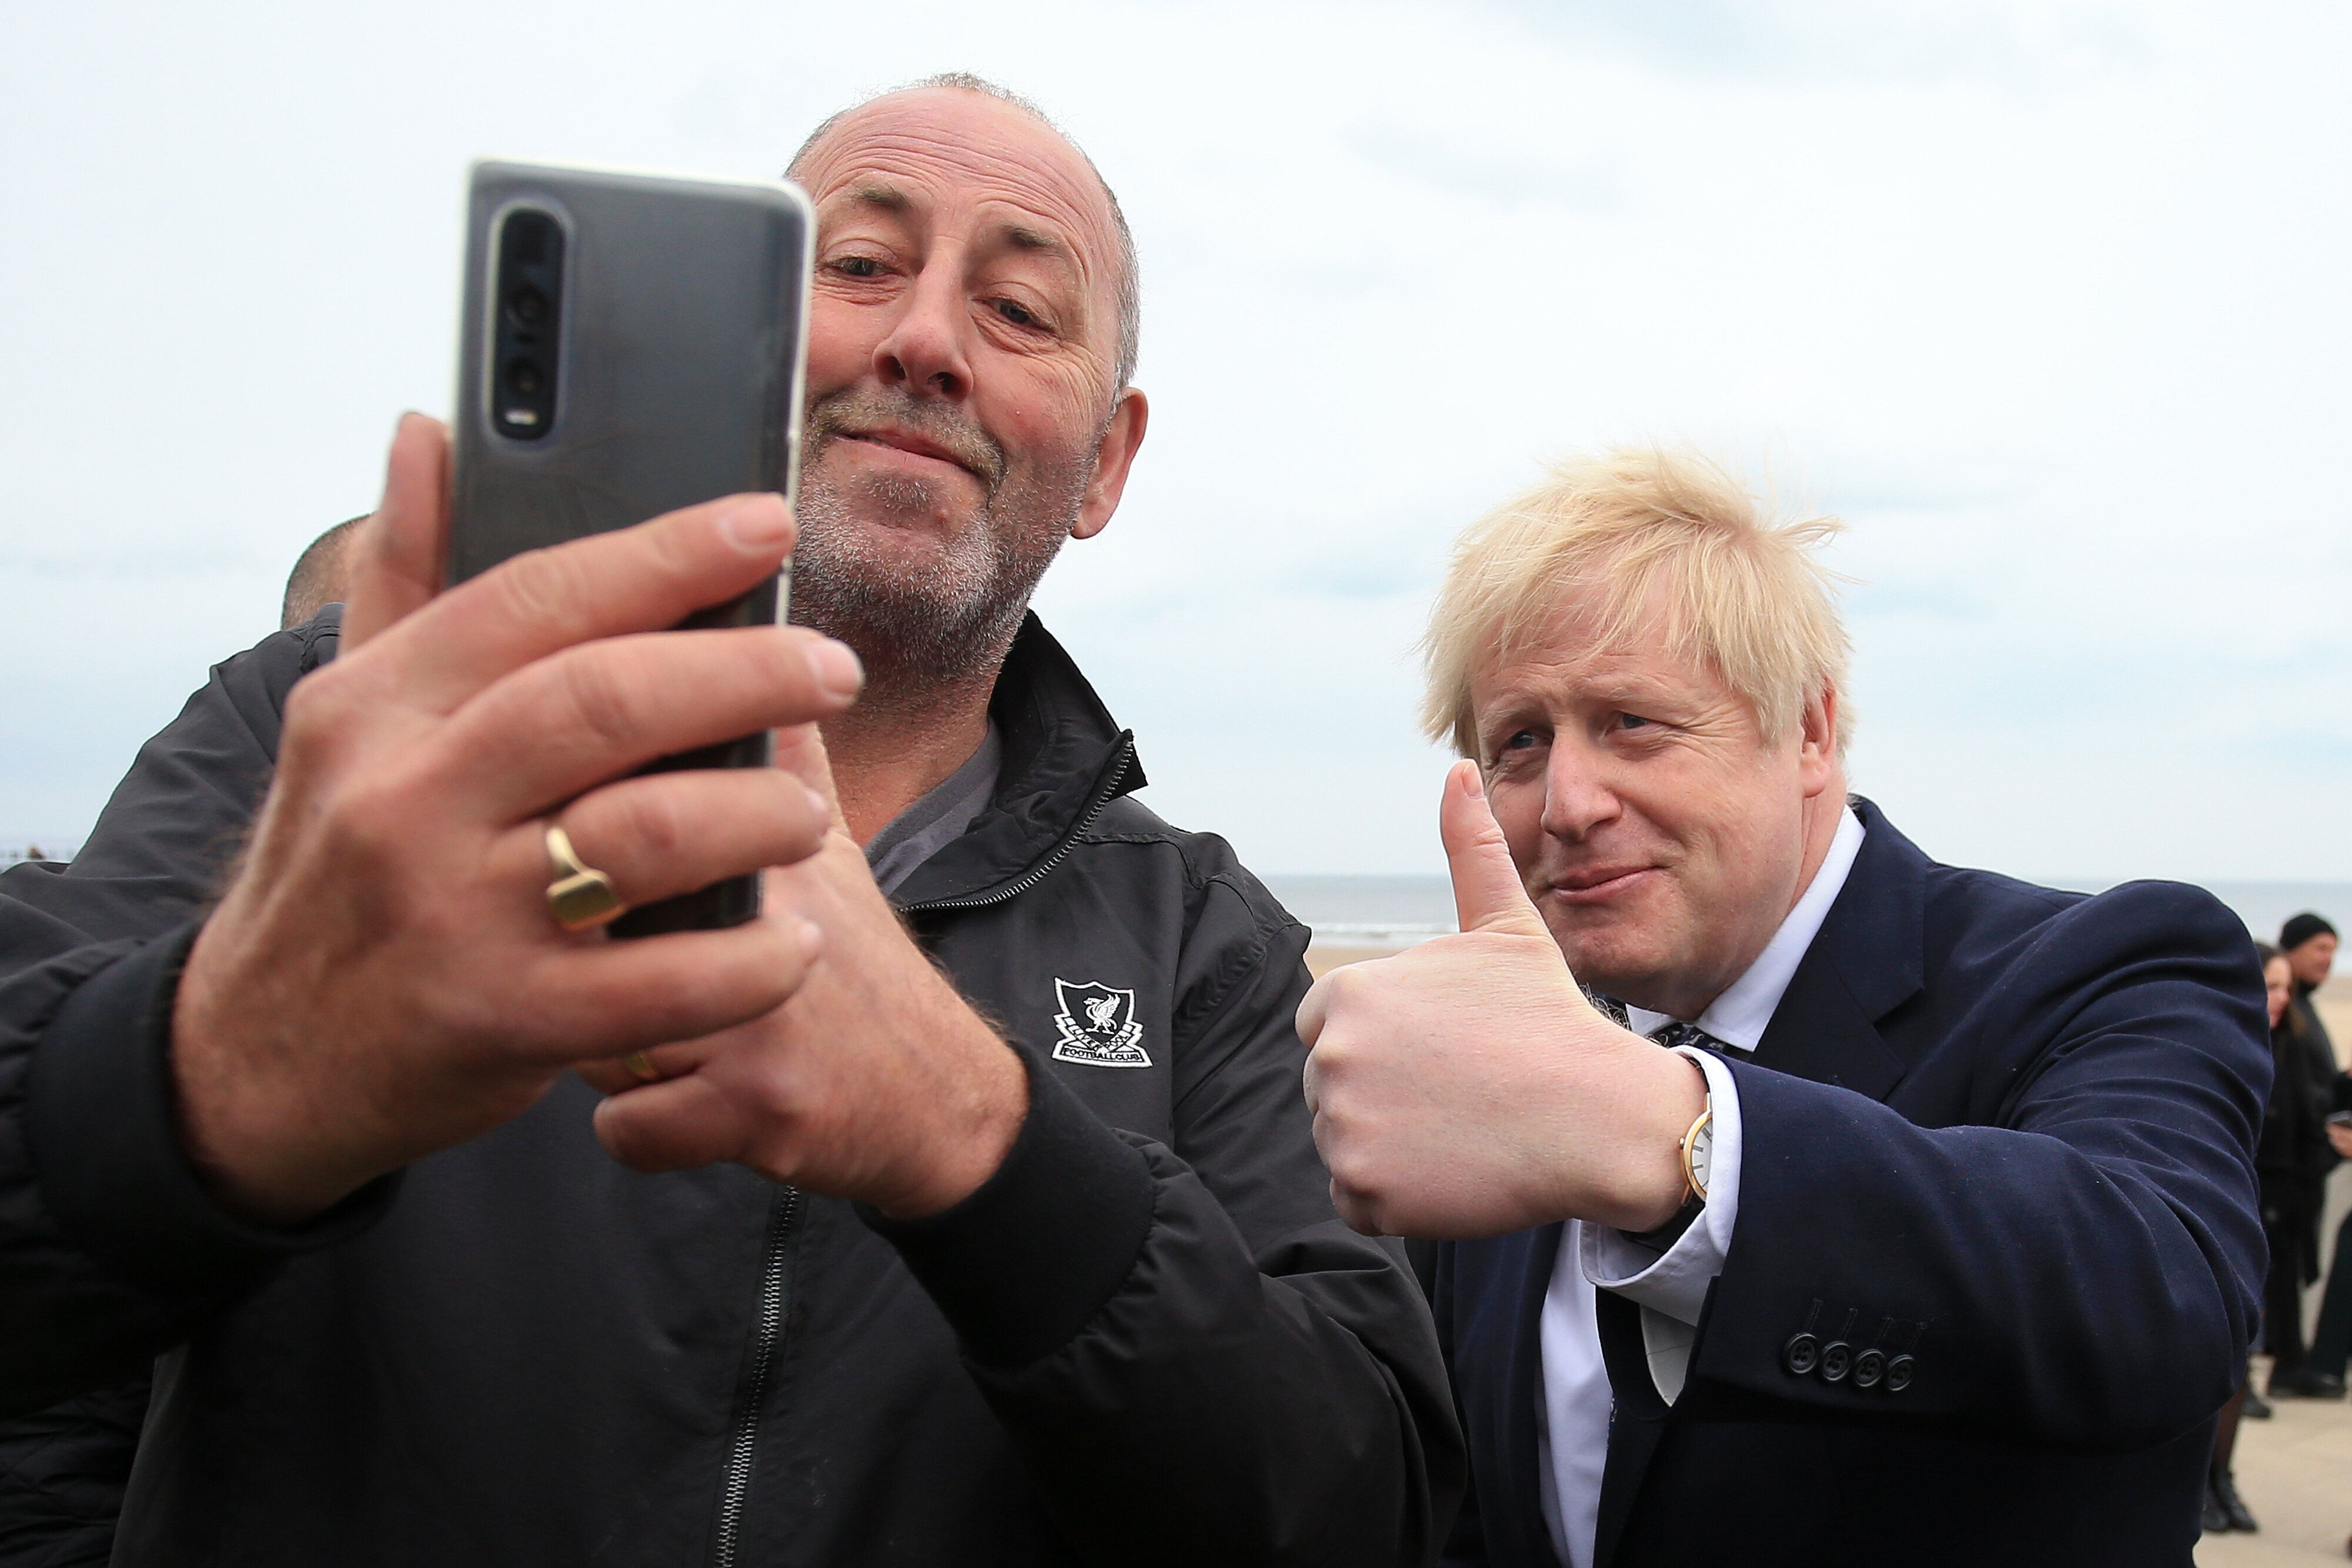 Boris Johnson poses for a 'selfie' photograph as he meets members of the public while campaigning in